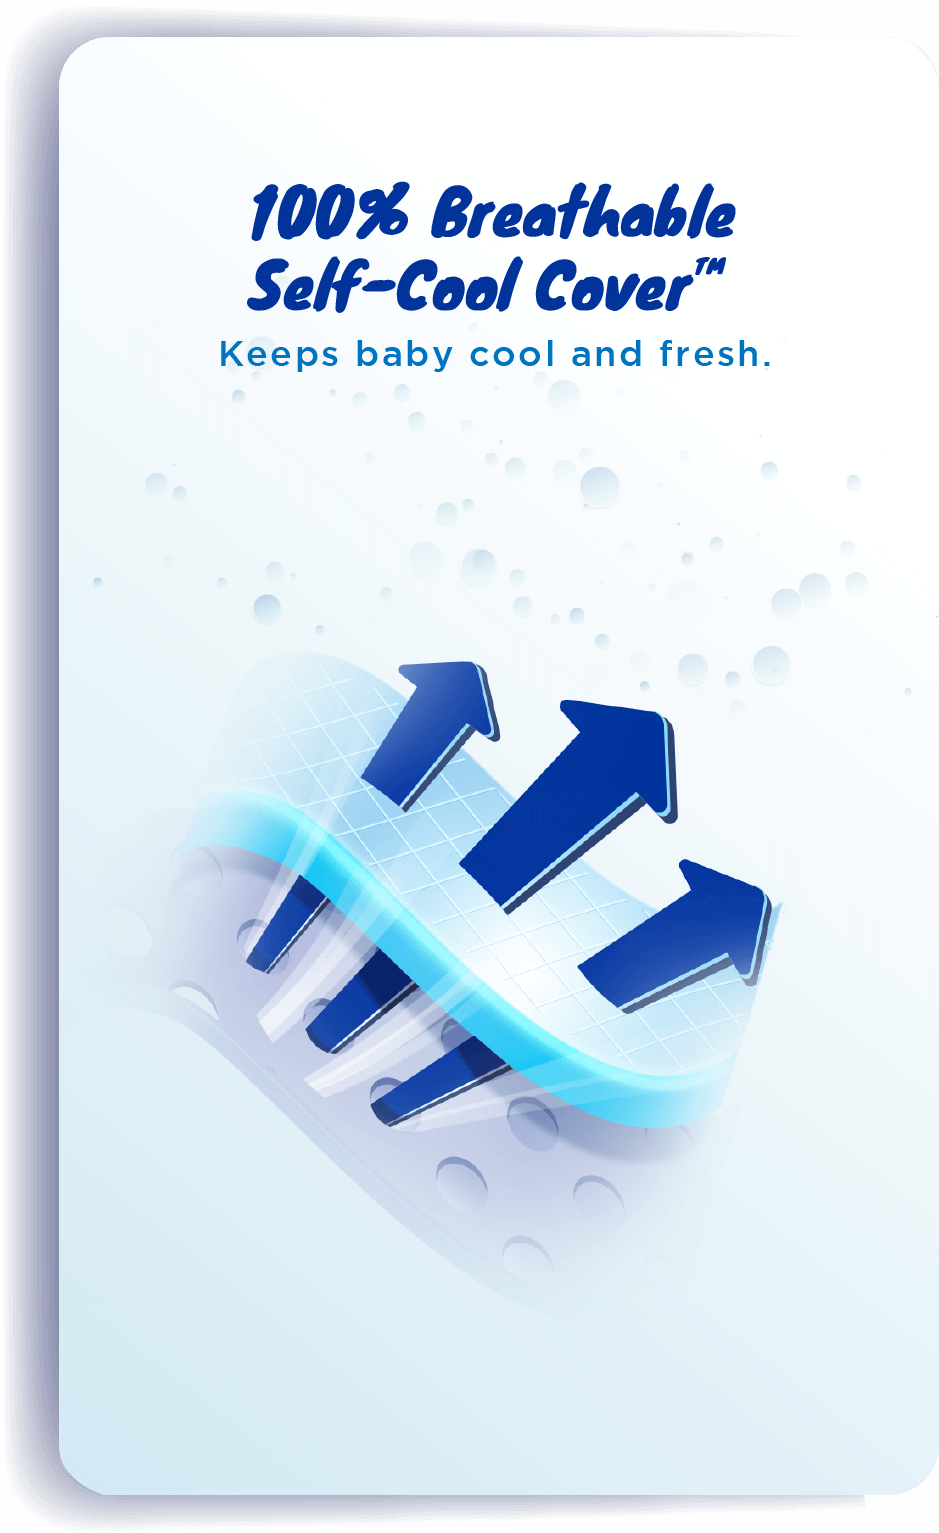 100% Breathable Self-cool Cover™: Keep baby cool and fresh.